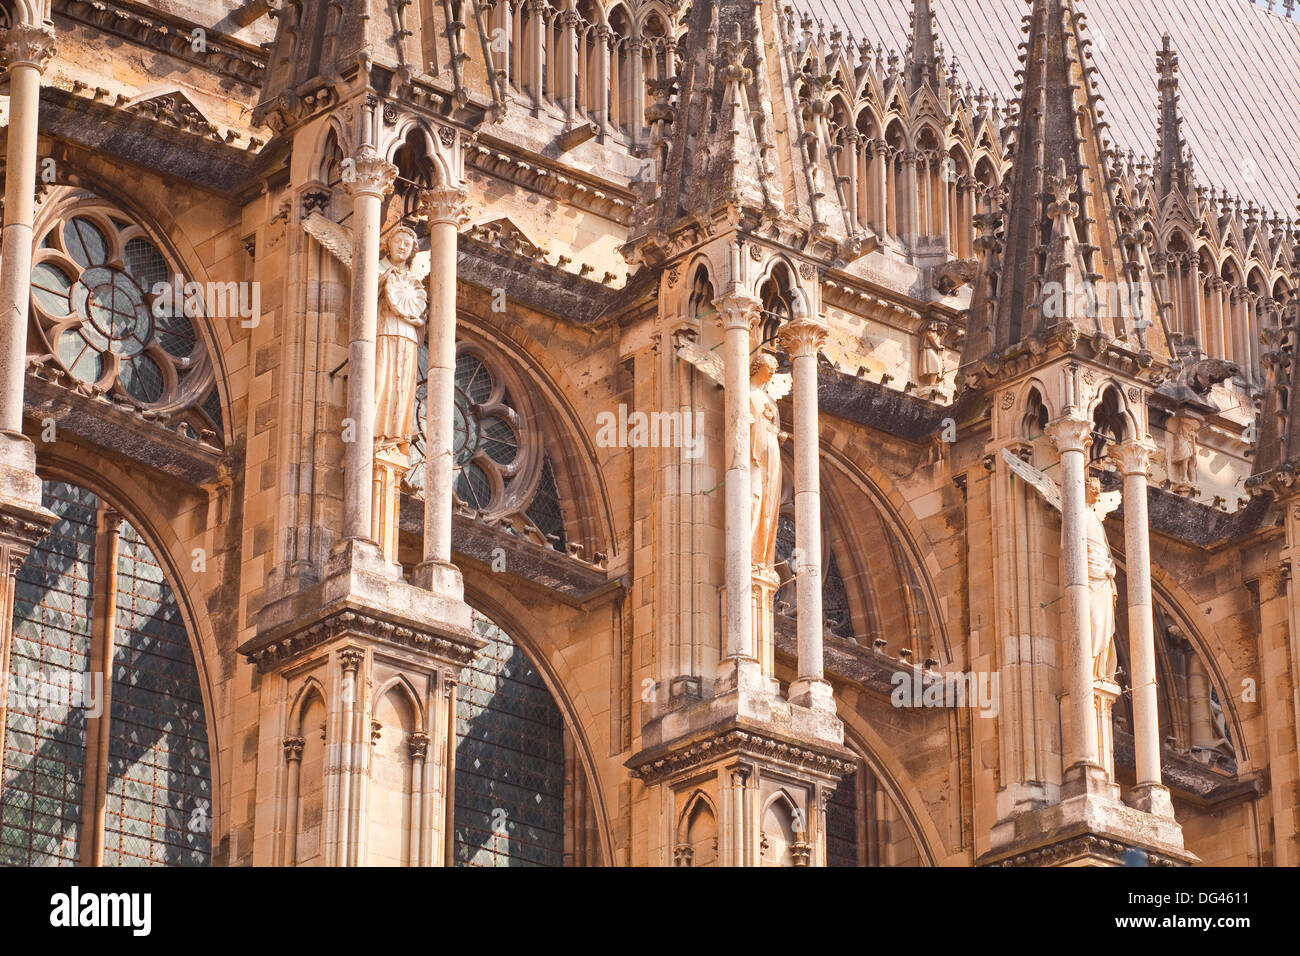 Gothic architecture on the southern facade of Notre Dame de Reims cathedrall, UNESCO Site, Reims, Champagne-Ardenne, France Stock Photo